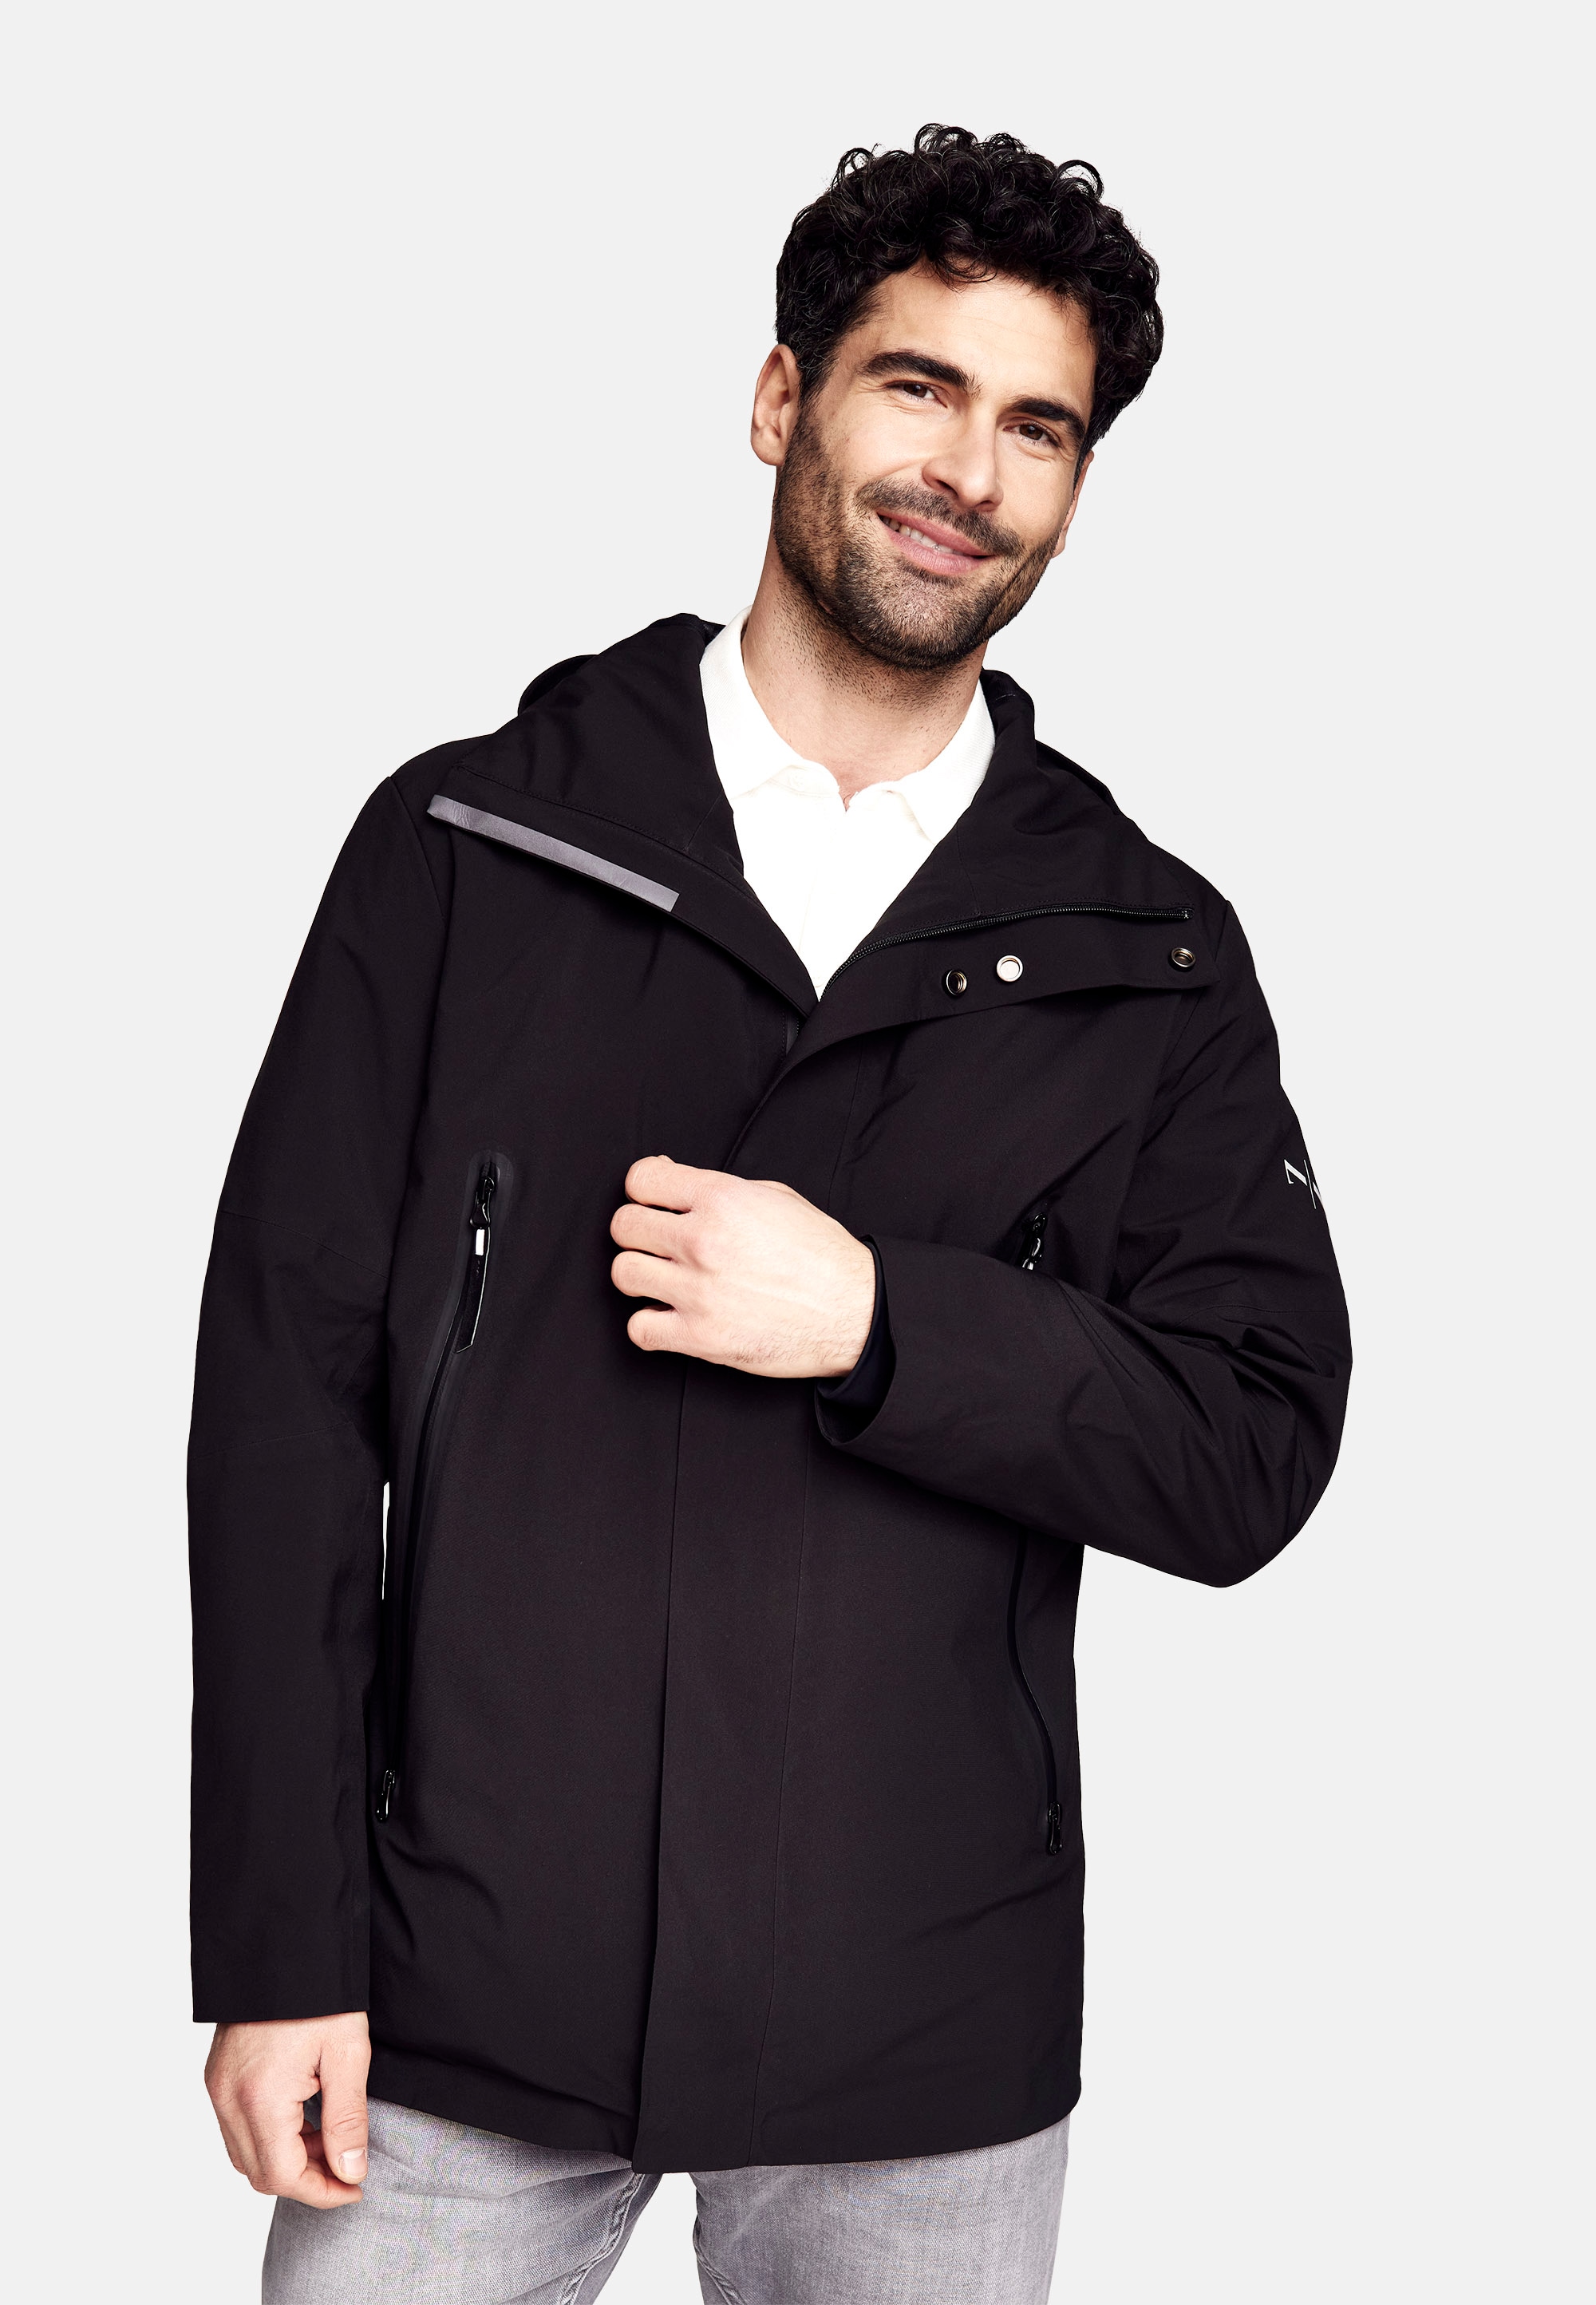 Outdoorjacke »Alpha Voyager«, aus recyceltem Material